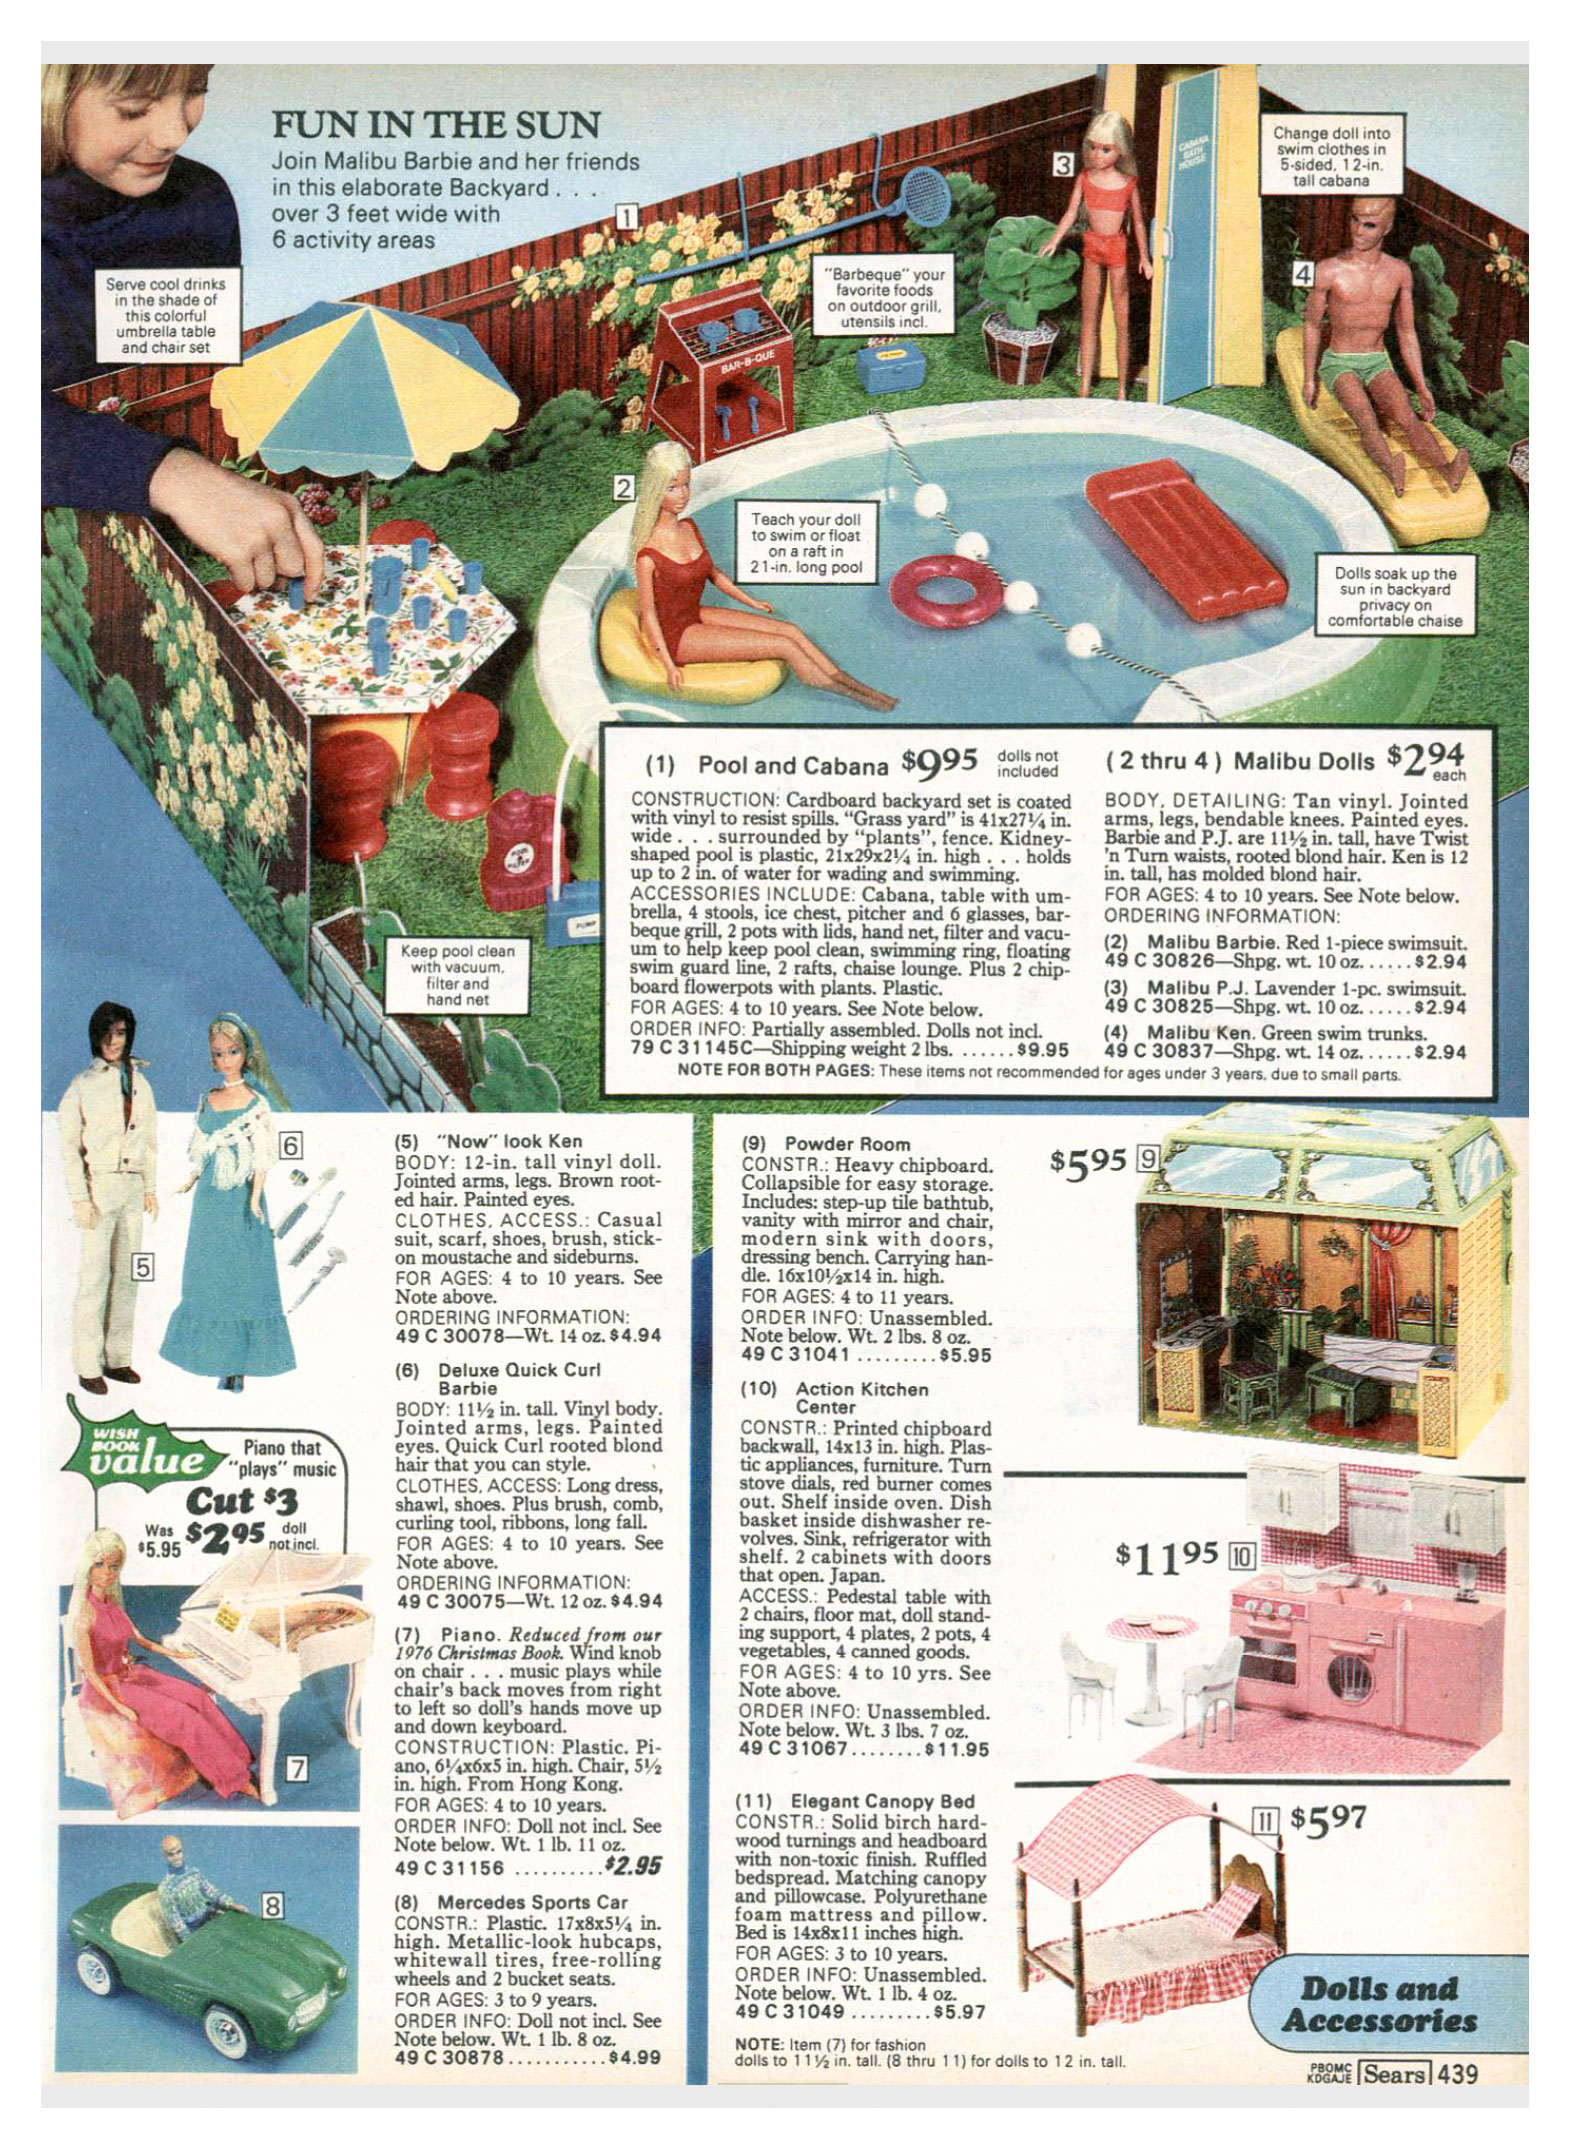 From 1977 Sears Wish Book